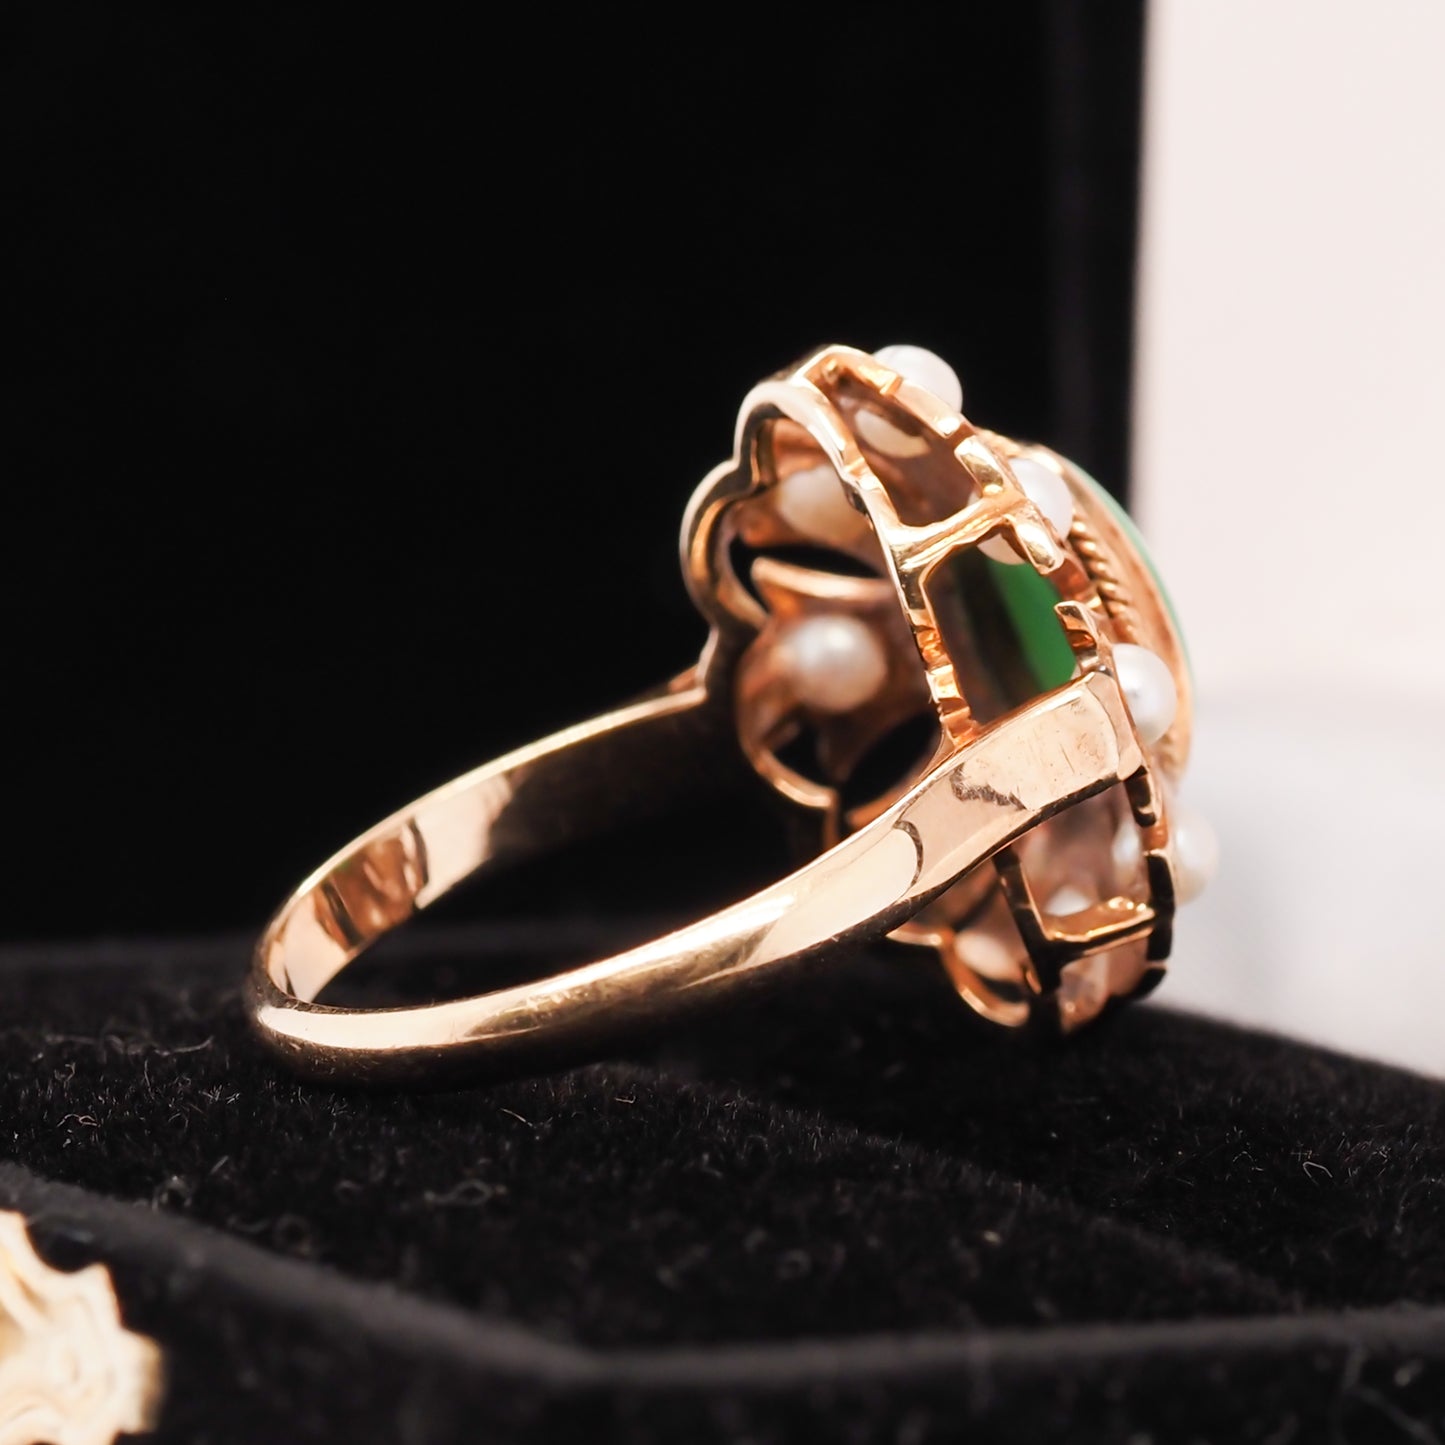 Vintage 1960s 14K Yellow Gold Jade and Pearl Cocktail Ring